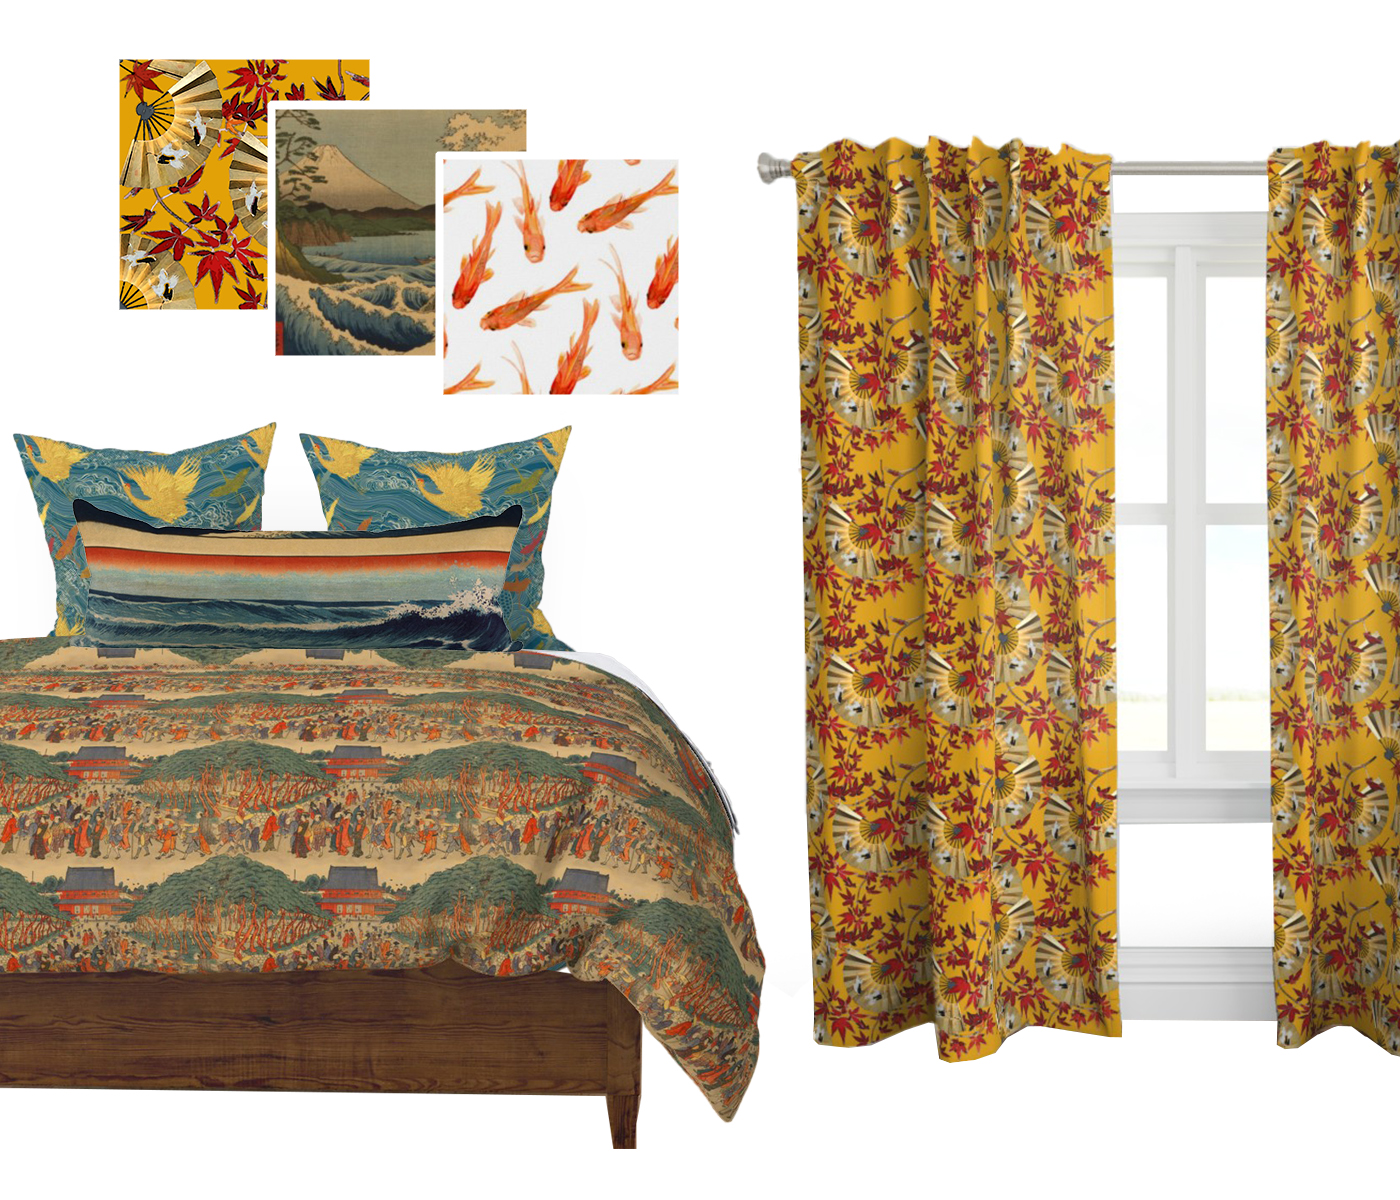 A mockup of a room featuring a bed with a bedspread with a repeating design of people standing near a large tree and a red temple that has a white pillow at the top in front of two blue pillows with yellow and red cranes. The wallaper designs have gold fans with red flowers on a yellow background, a blue and white wave blockprint with a gray mountain in the background and large orange ditsy goldfish on a white background. The curtains also have gold fans with red flowers on a yellow background.